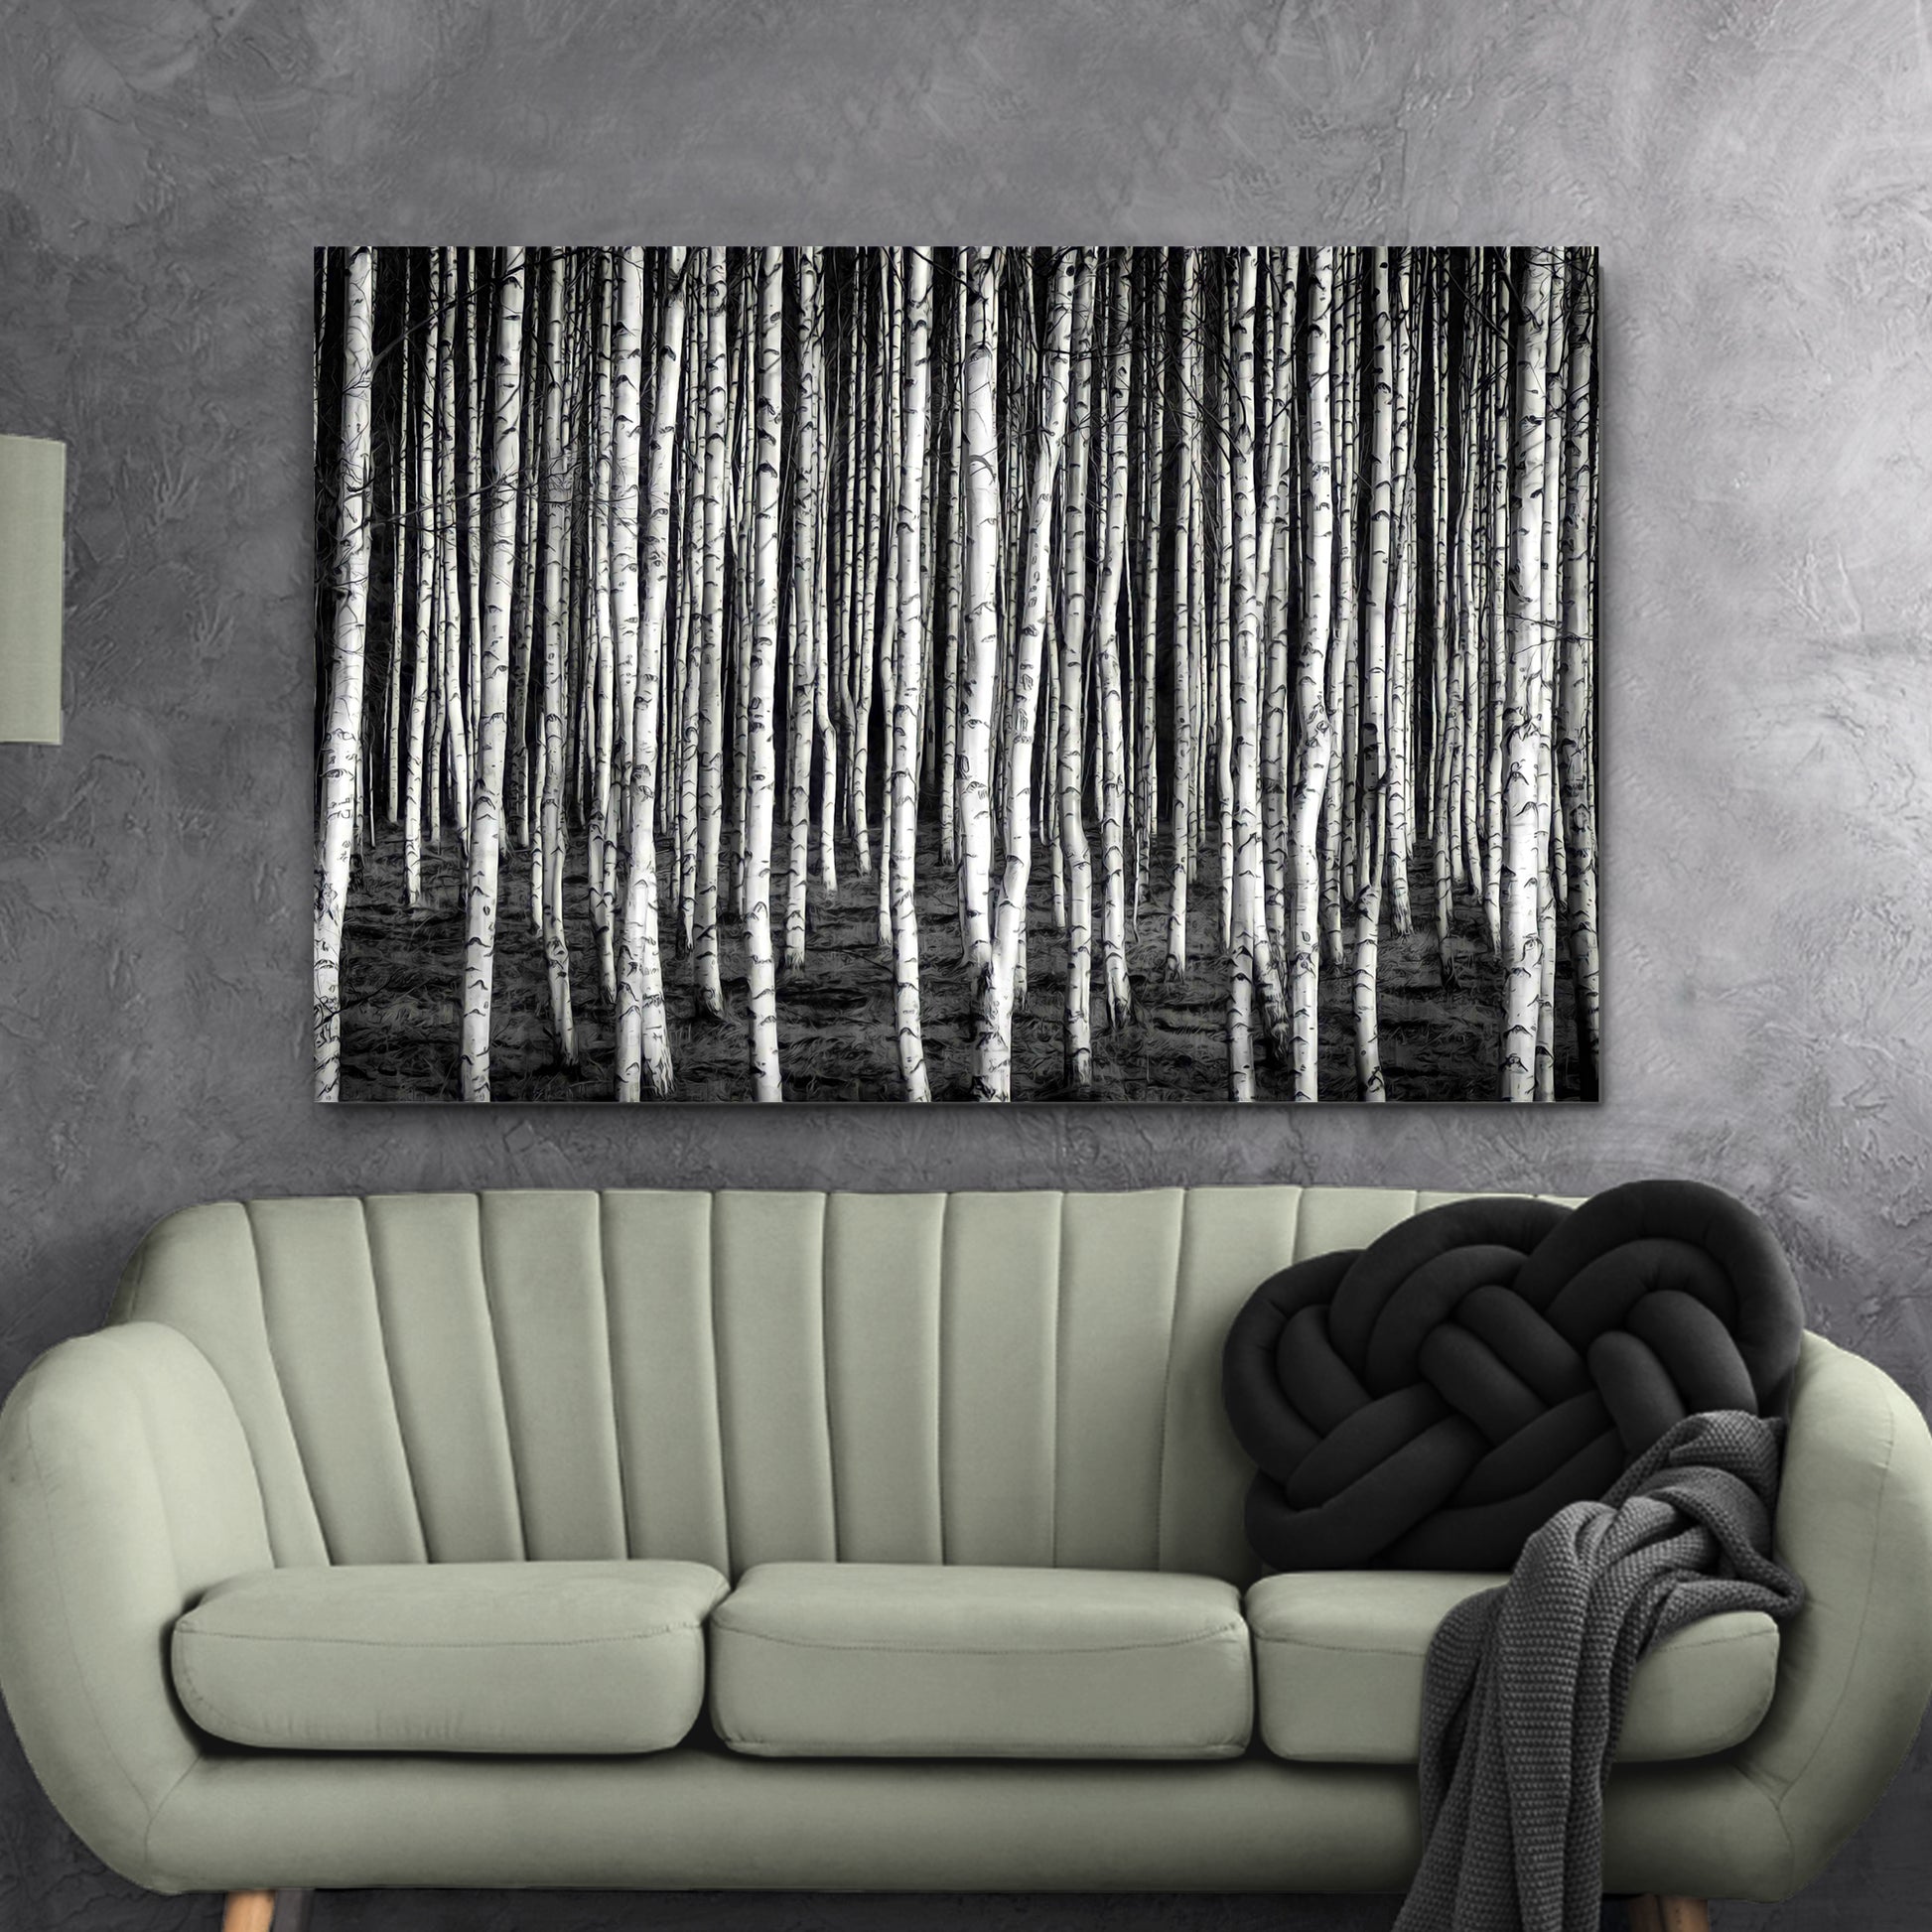 Monochrome Birch Trees Canvas Wall Art Style 2 - Image by Tailored Canvases